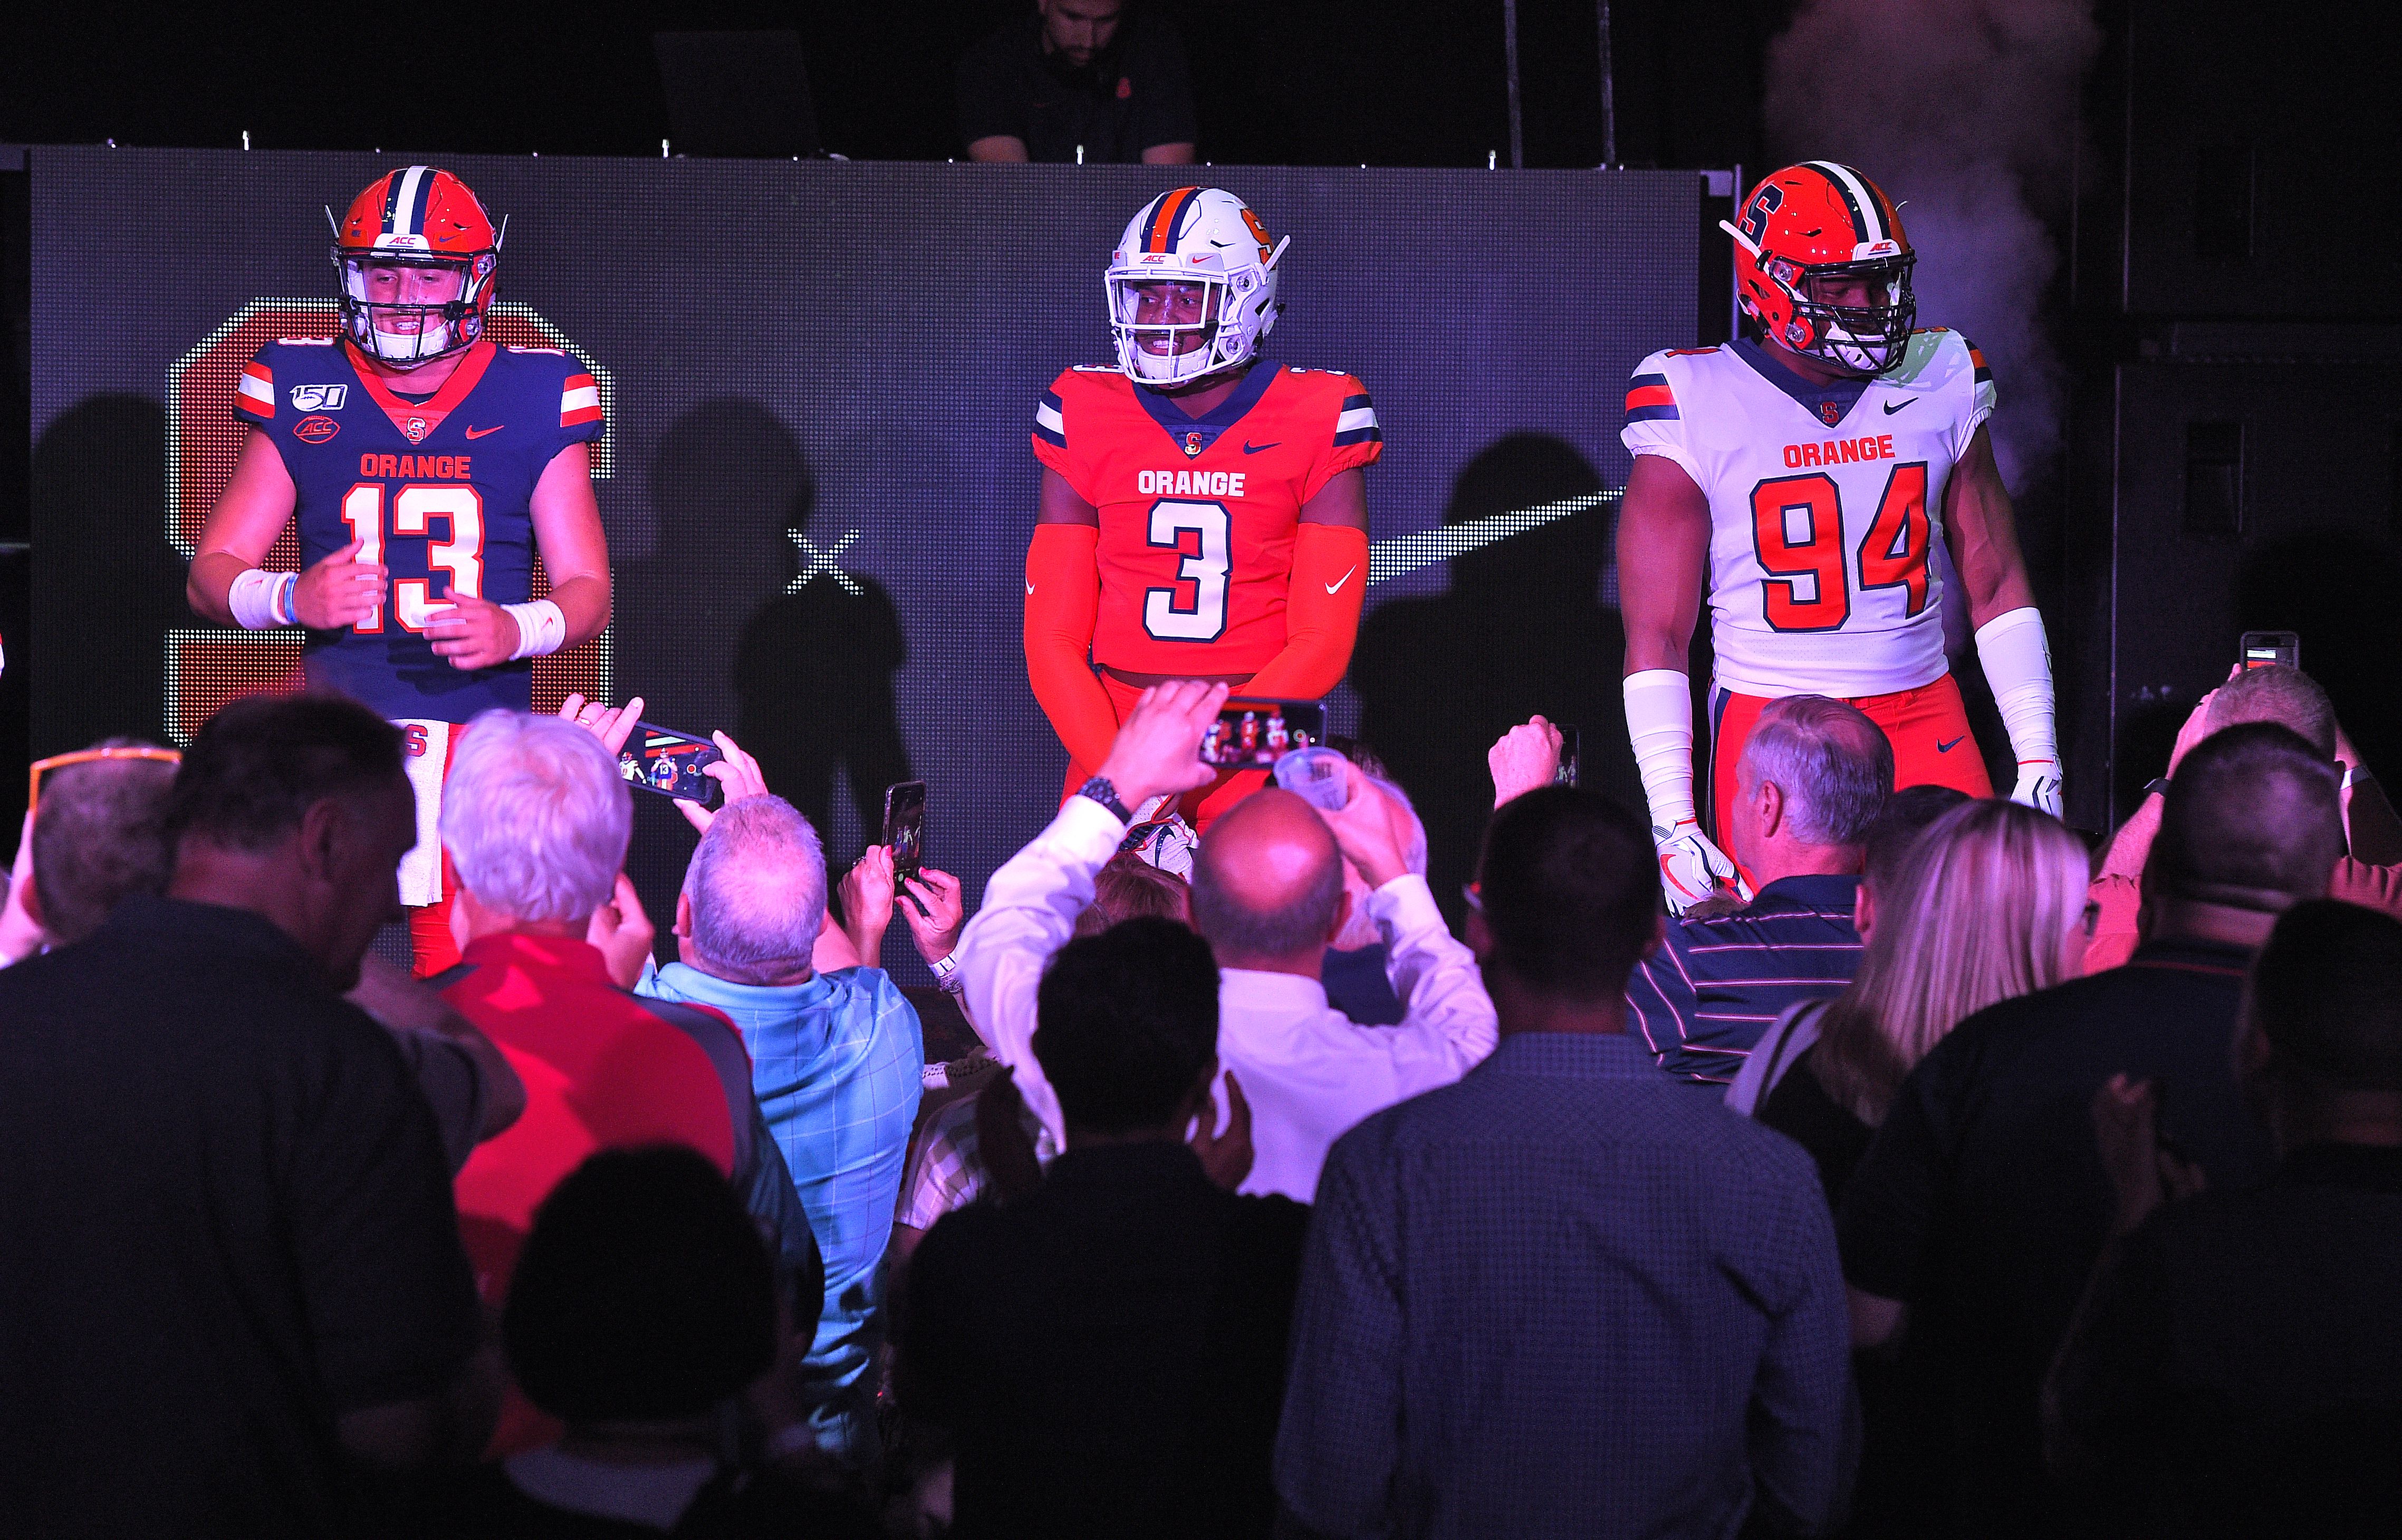 Syracuse football's Nike jersey sales delayed over production